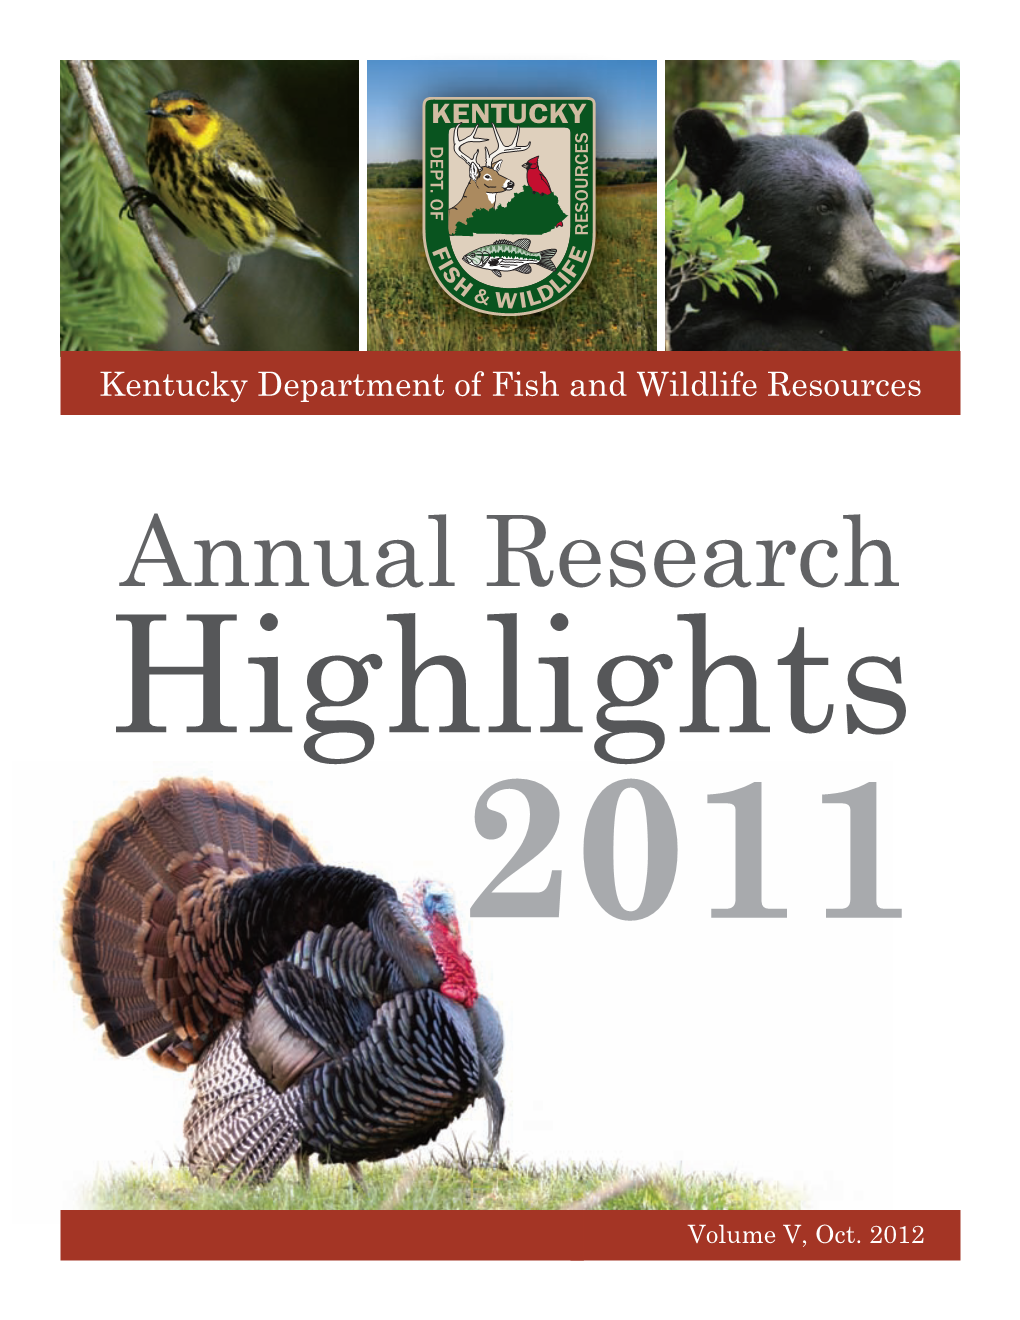 KDFWR Annual Research Highlights 2011